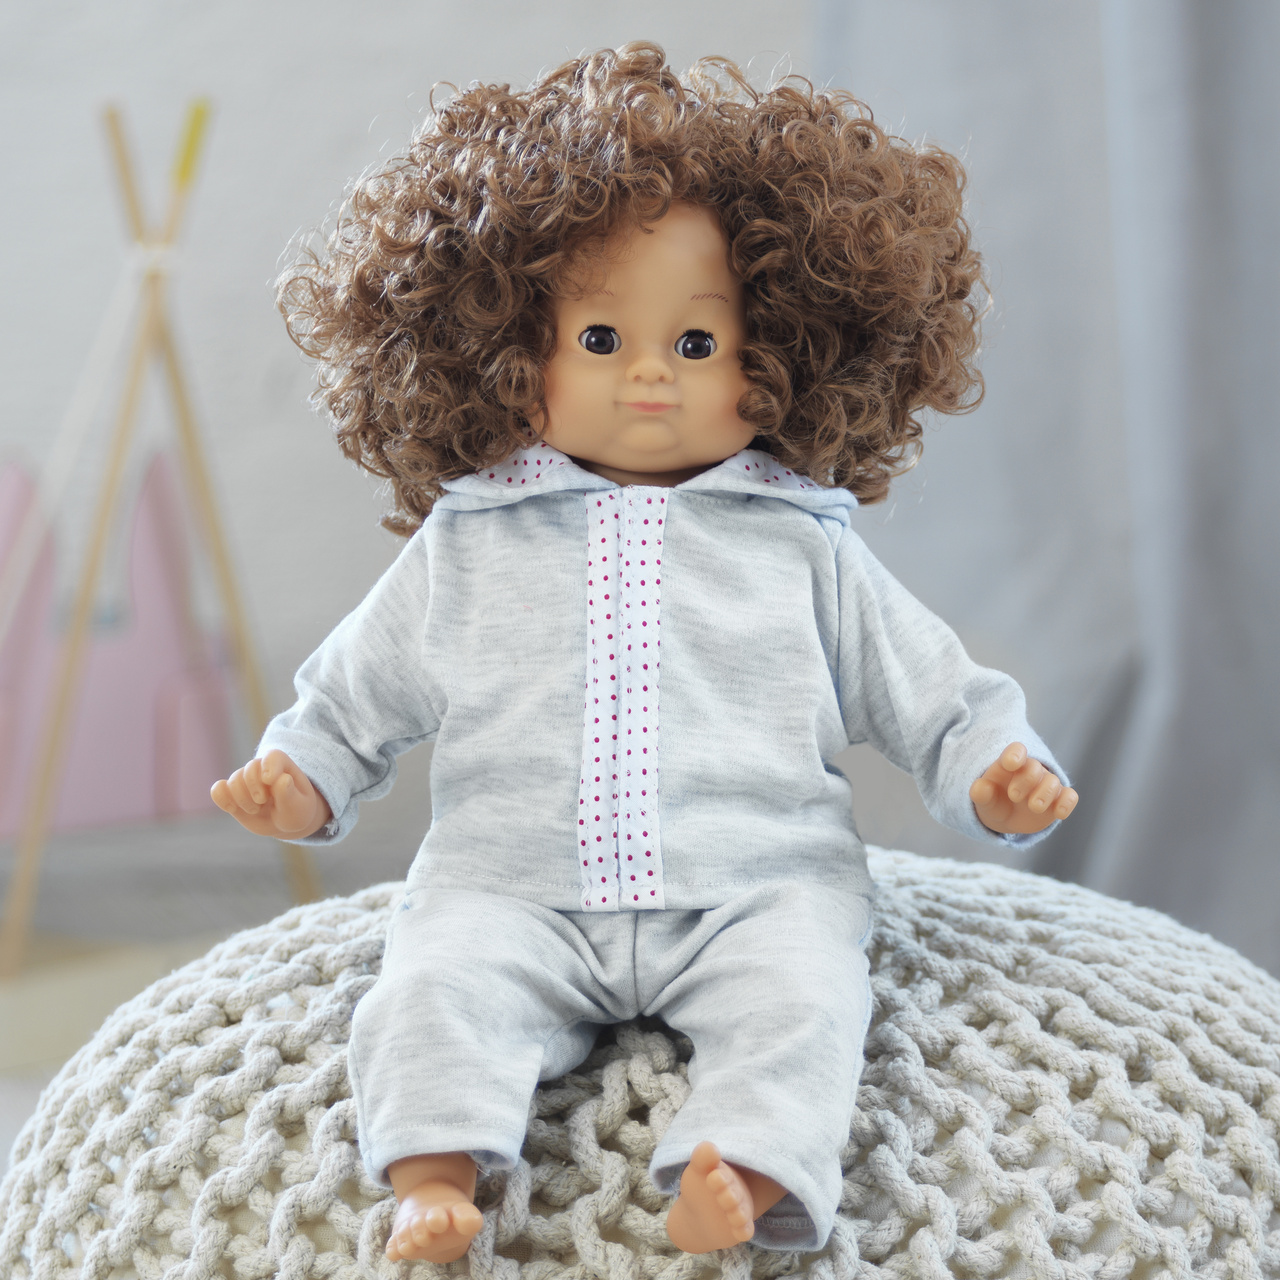 Outlet lundby	doll clothes casual dress 36-40 cm